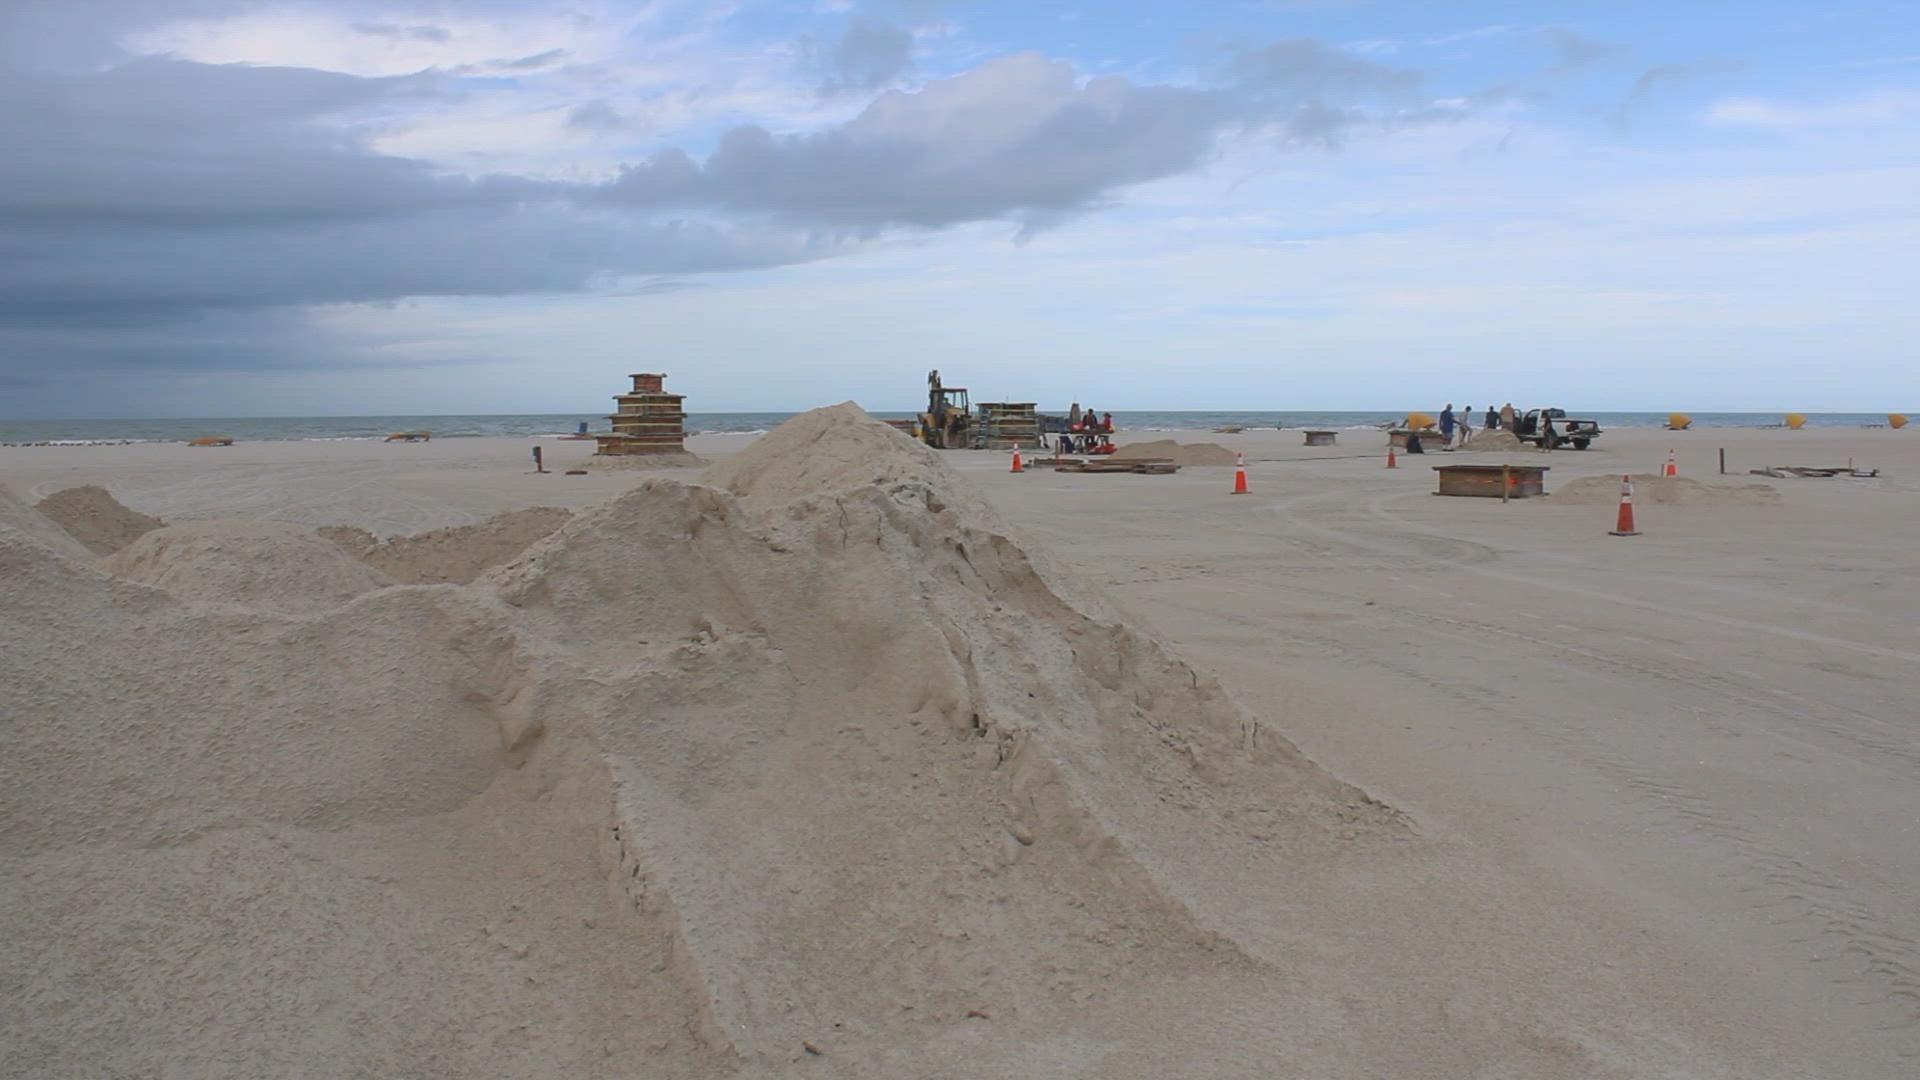 Sculptors worked hard at doing a pound-up, which involved creating a block of hard, moist, compact sand.